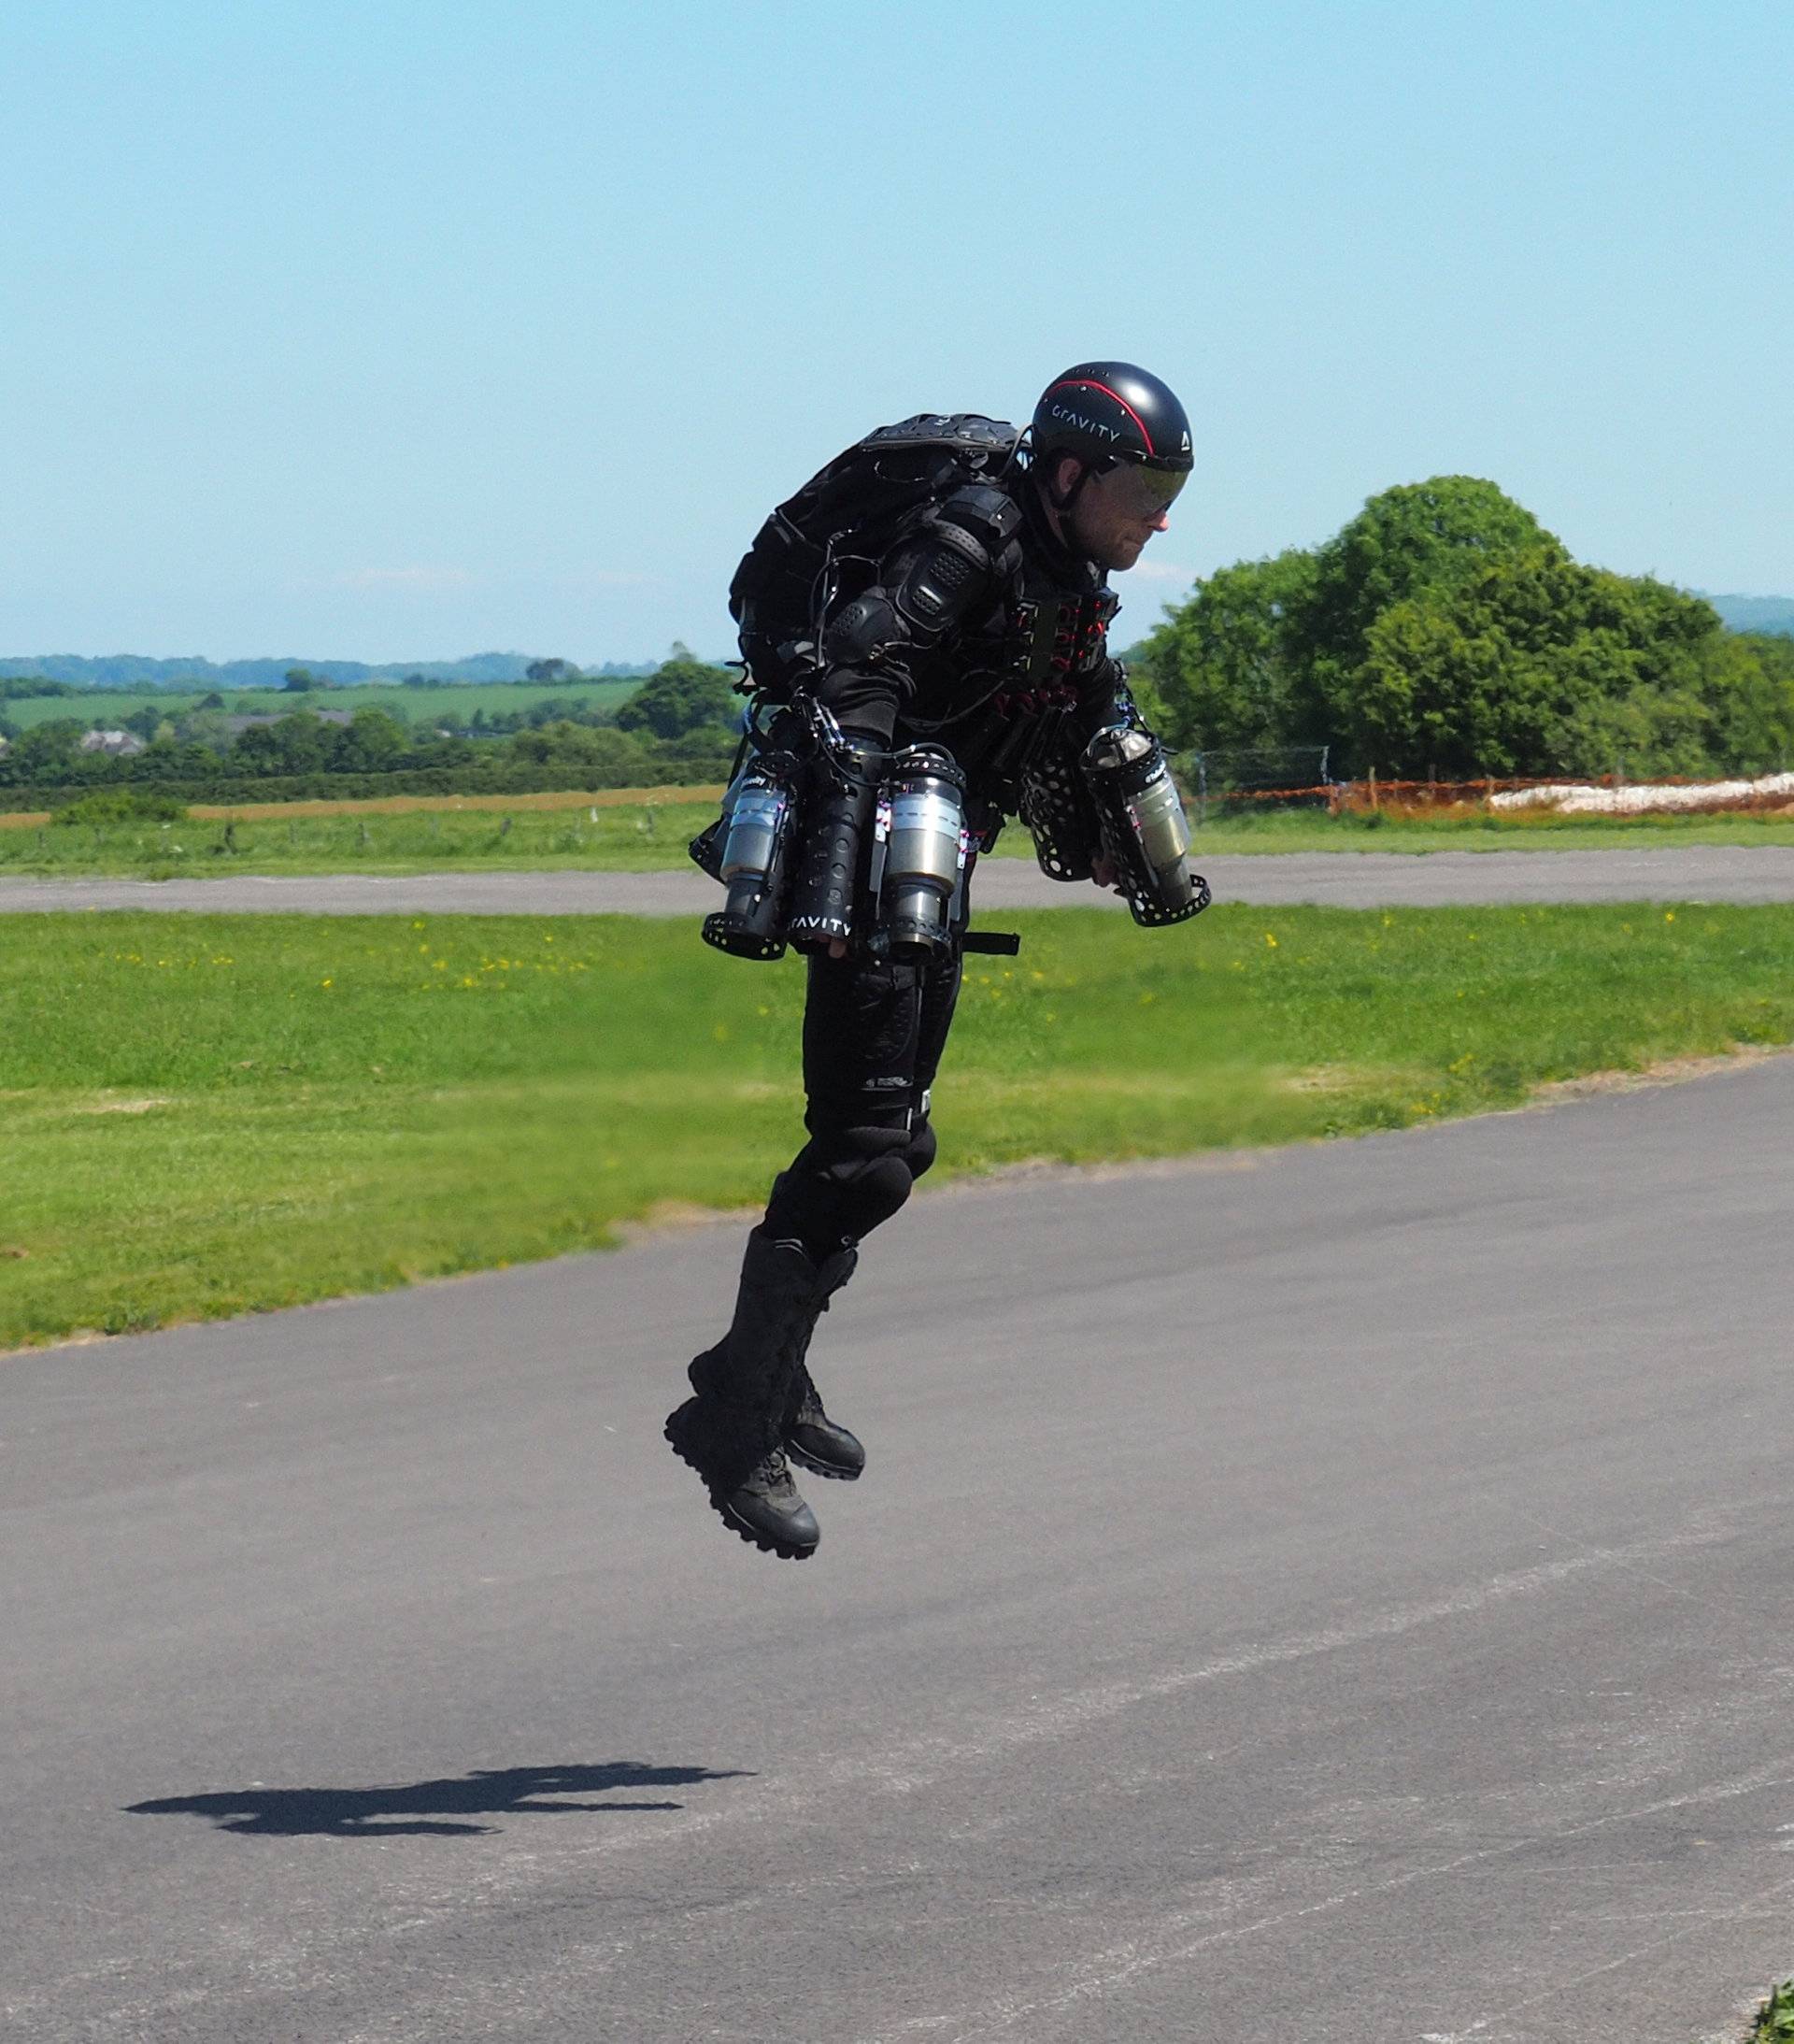 Inventor Richard Browning of technology startup Gravity flies in his ÃDaedalusÃ jet suit at Henstridge airfield in Somerset